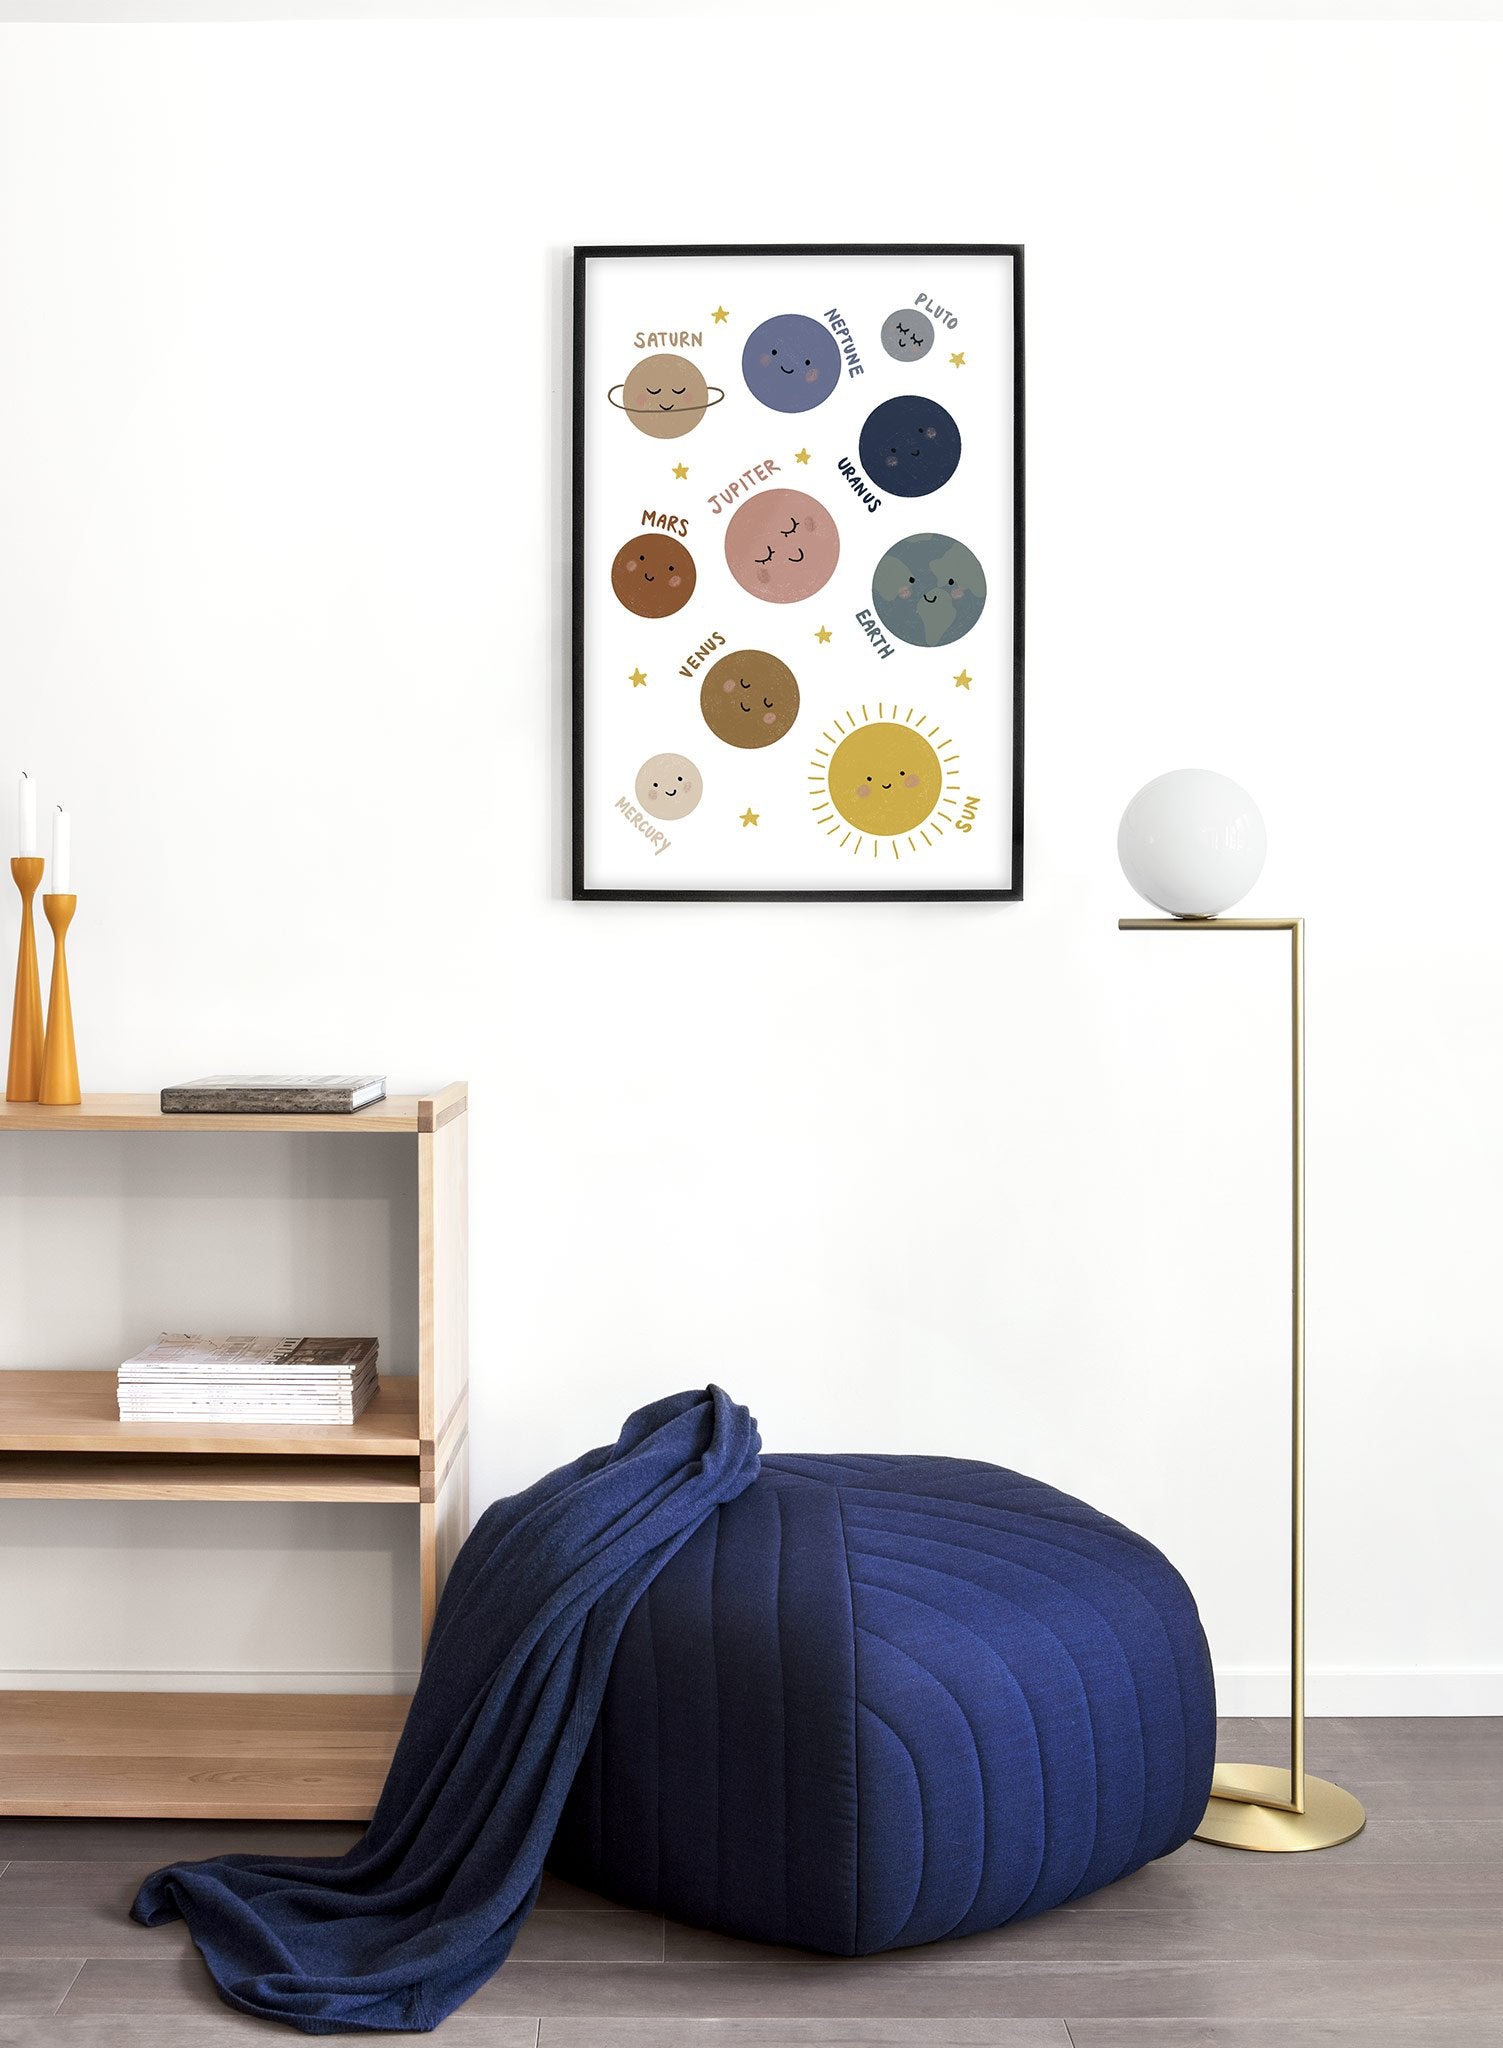 Kids nursery poster by Opposite Wall with solar system planets illustration - Lifestyle - Living Room